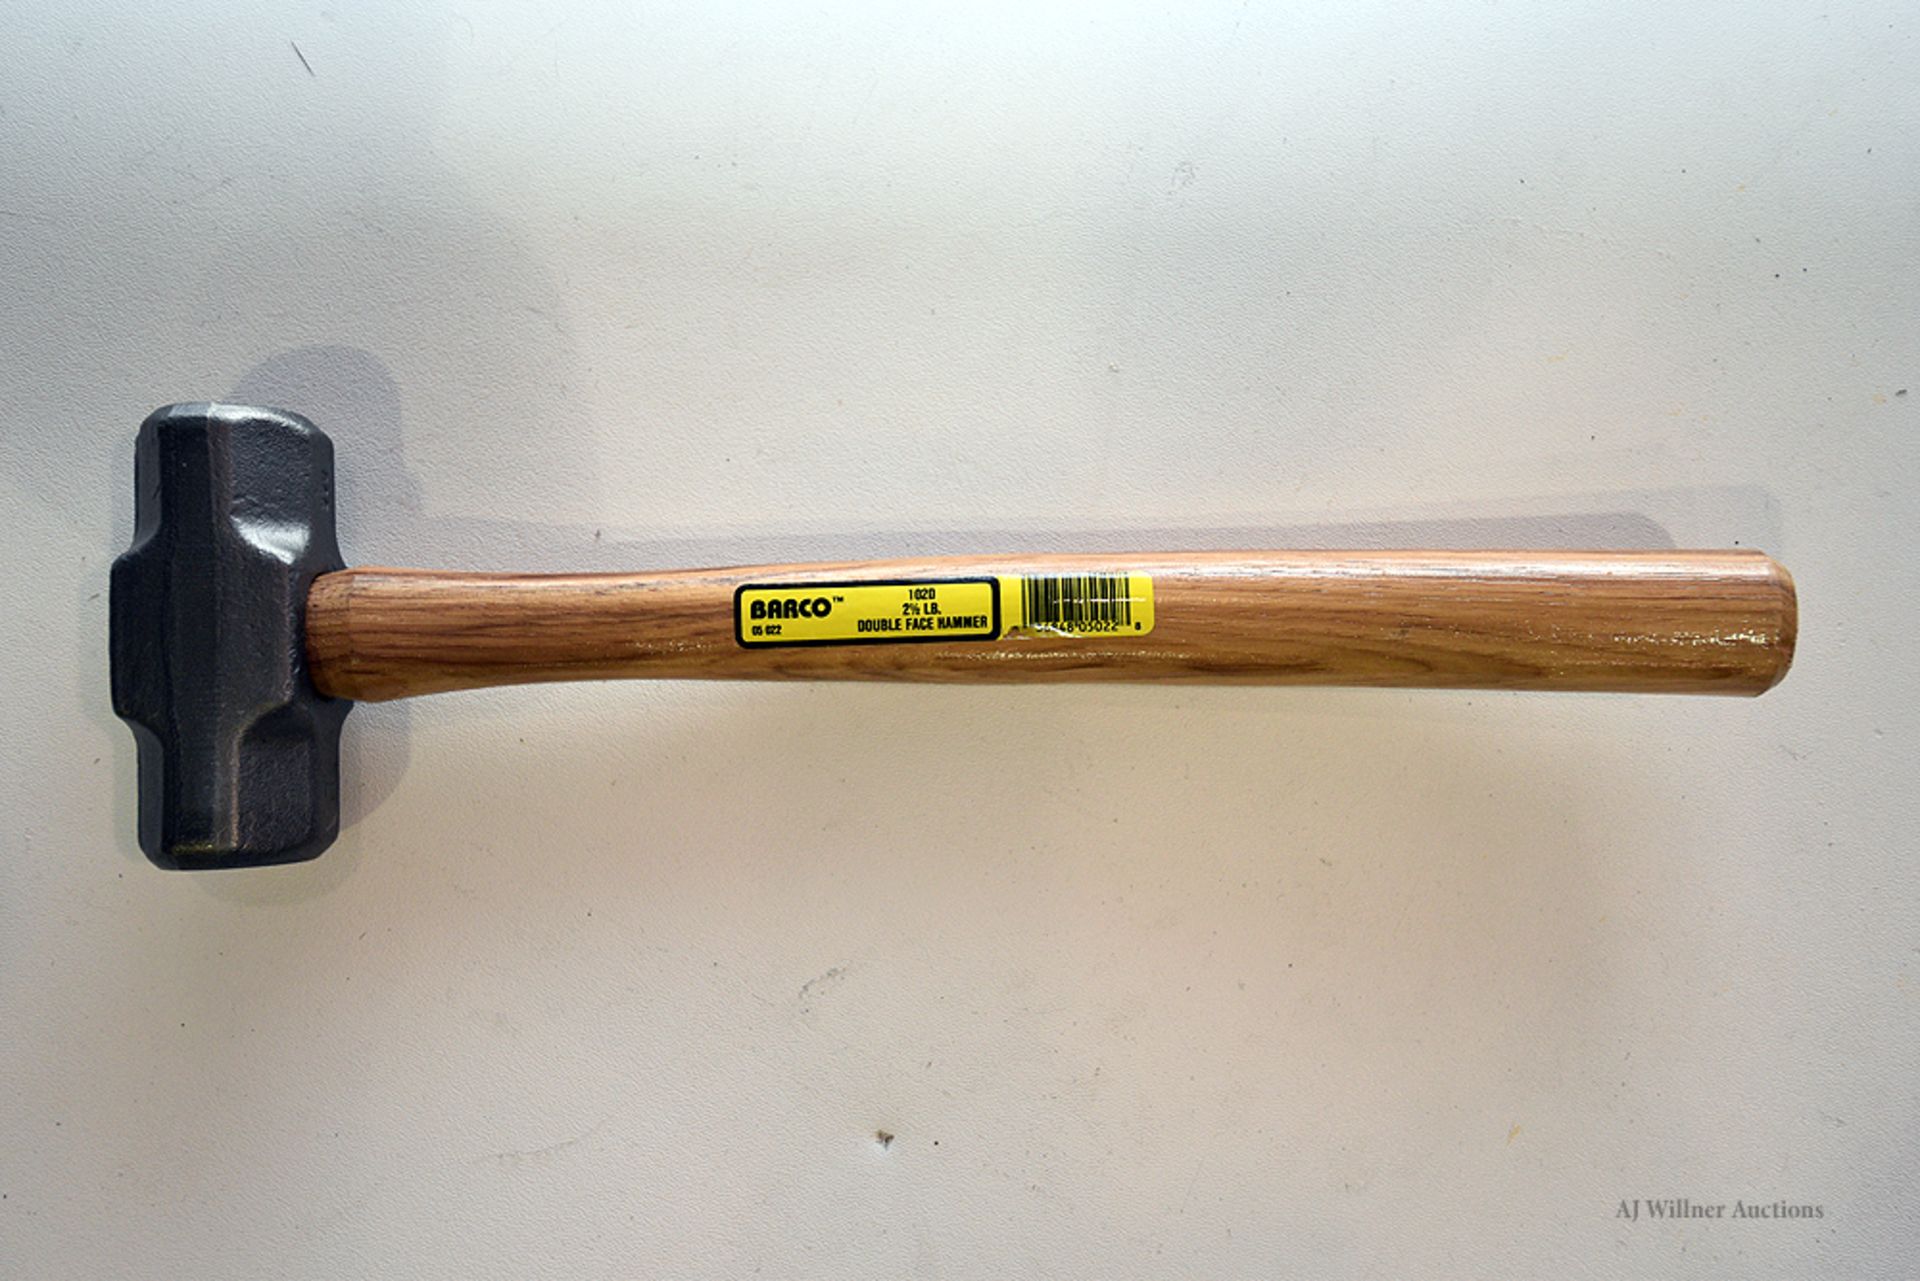 Barco 2.5 lbs. Double Faced Hammer (Short Handle)